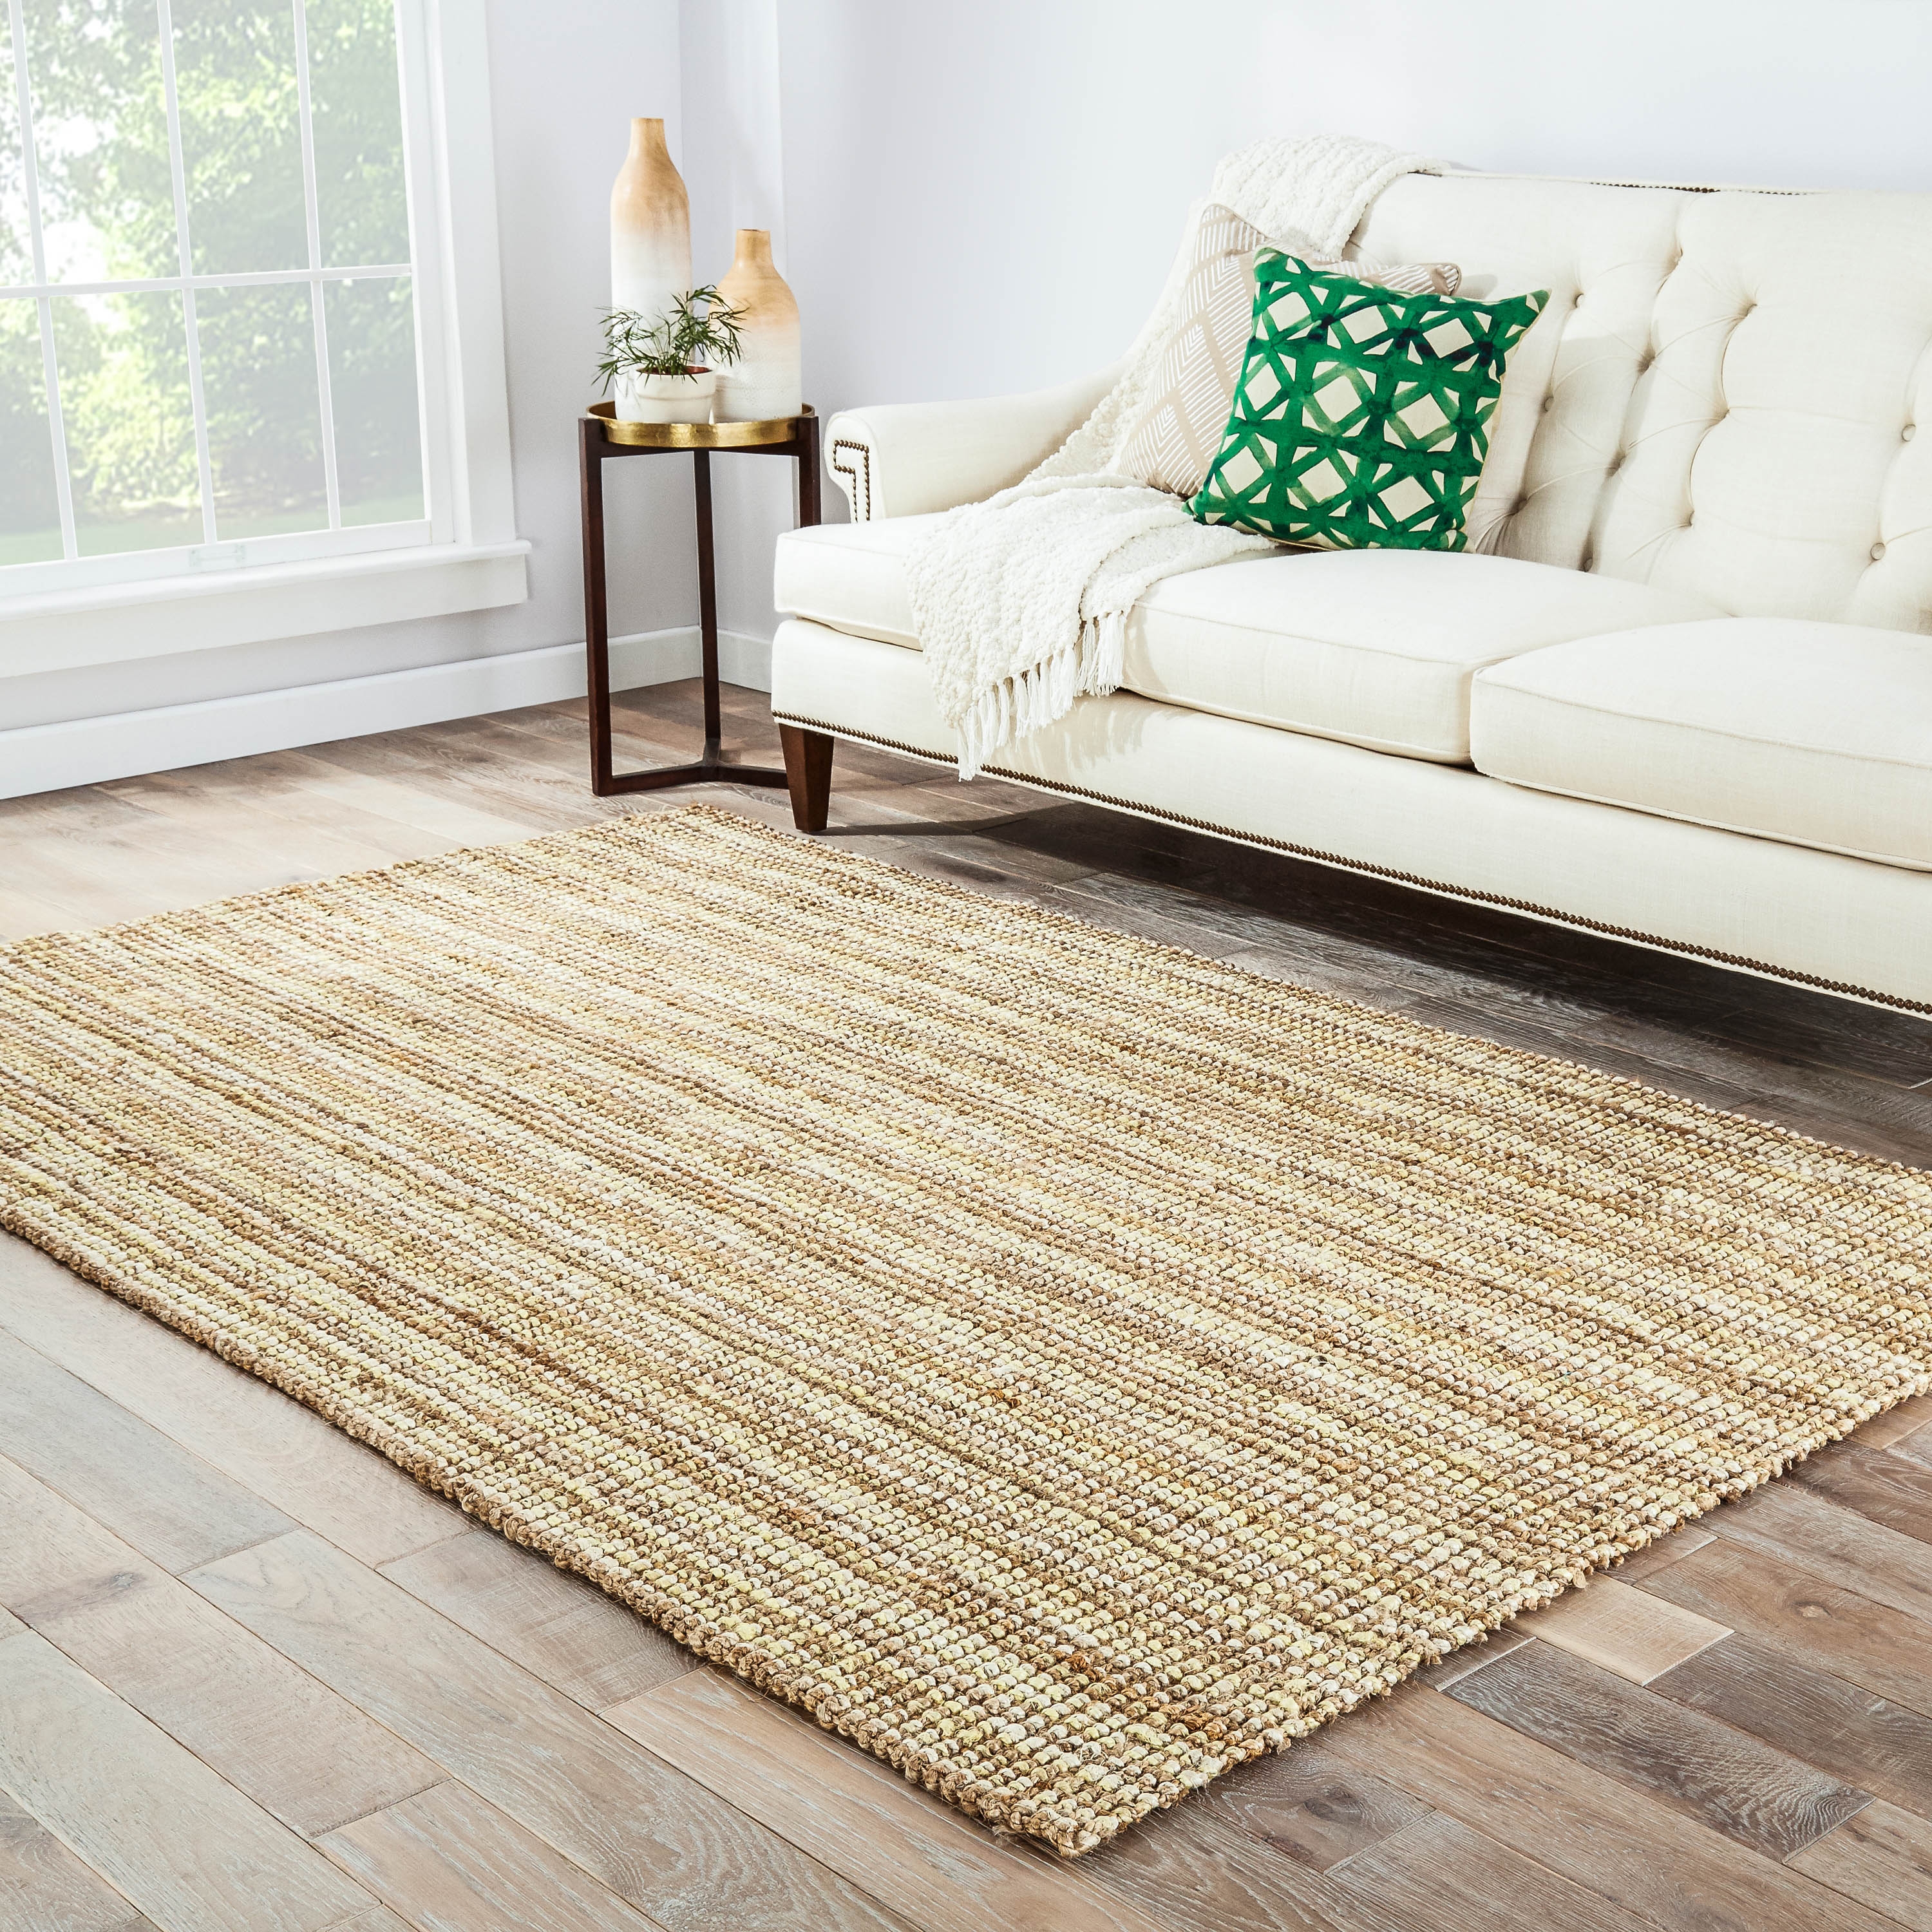 Marvy Natural Solid Beige/ White Area Rug (10' X 14') - Image 4